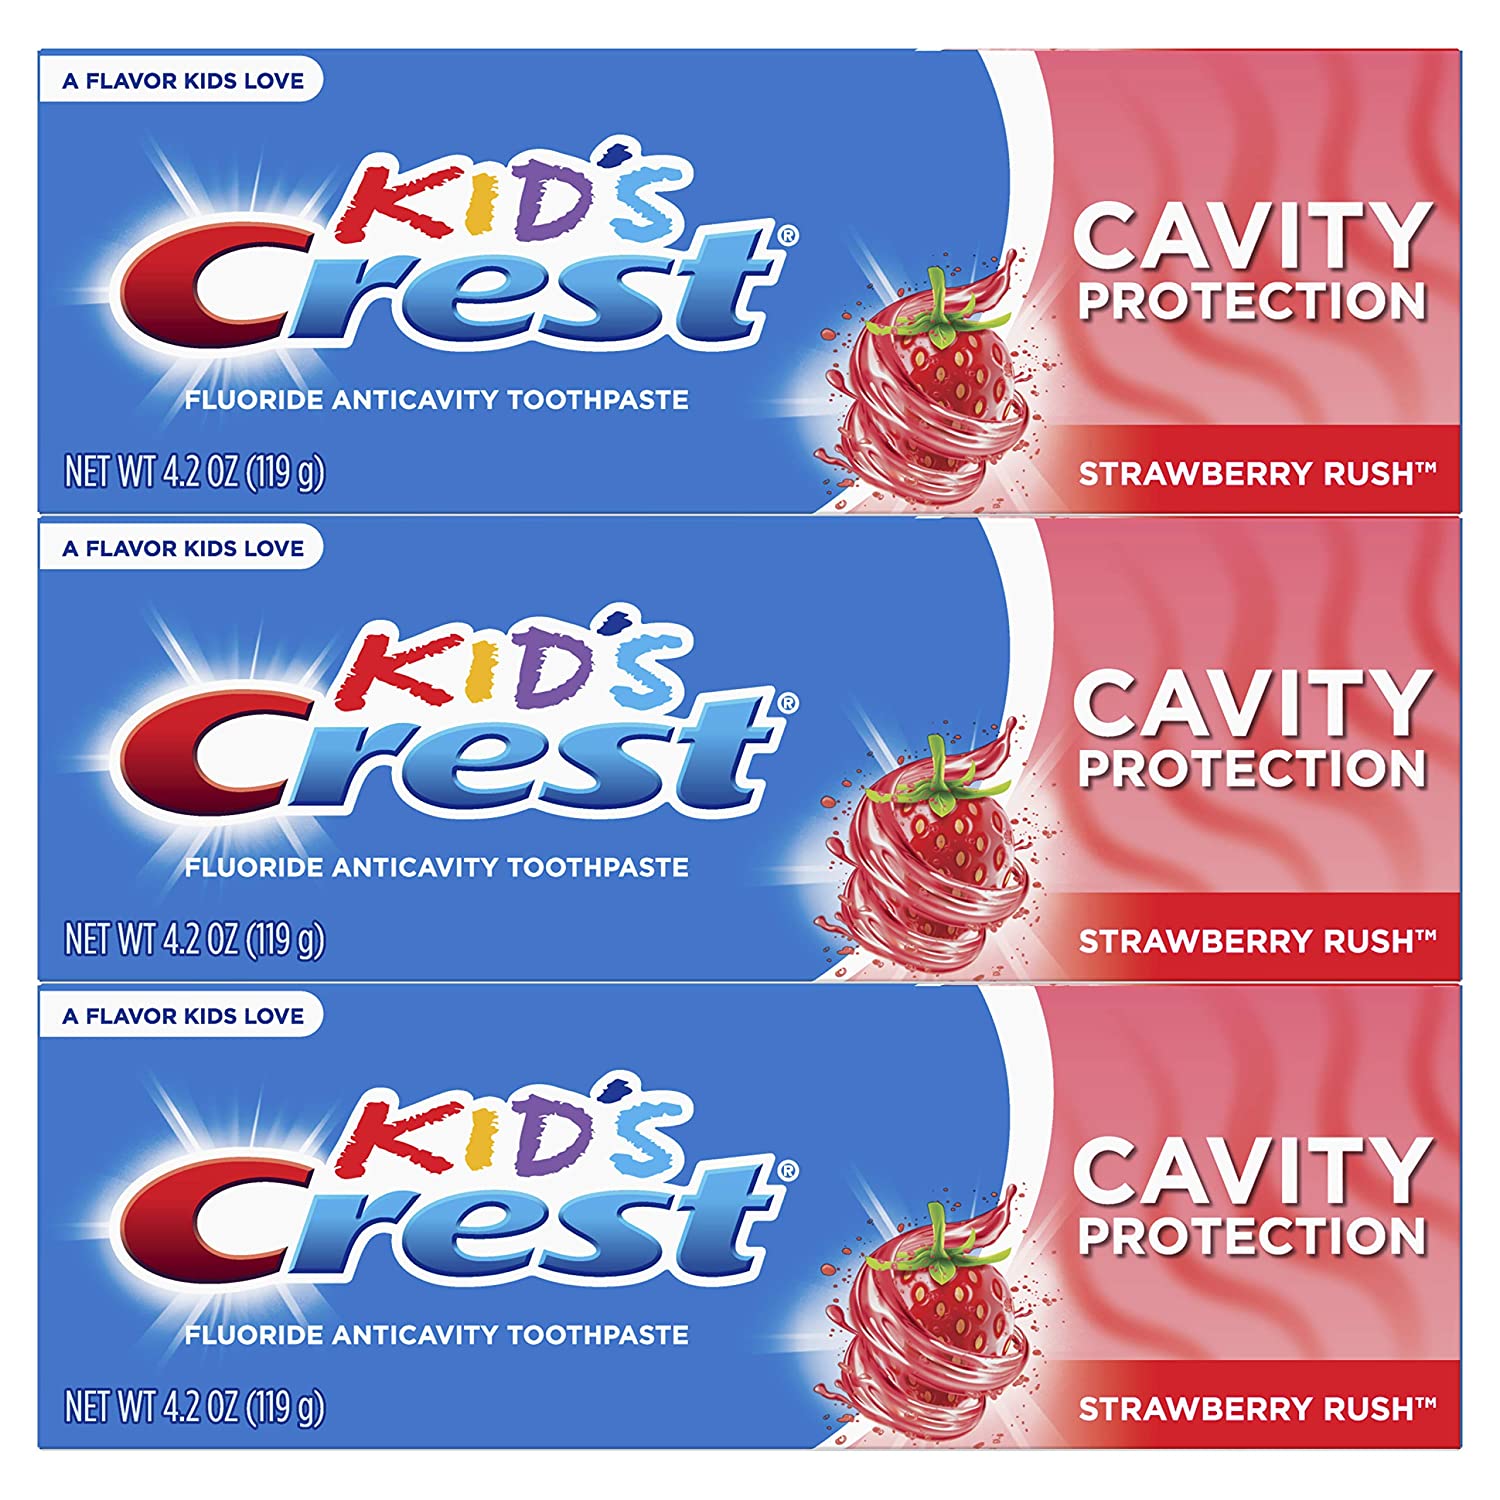 3-Count 4.2oz Crest Kid's Cavity Protection Fluoride Toothpaste, Strawberry Rush $3.96 w/ S&S @ Amazon